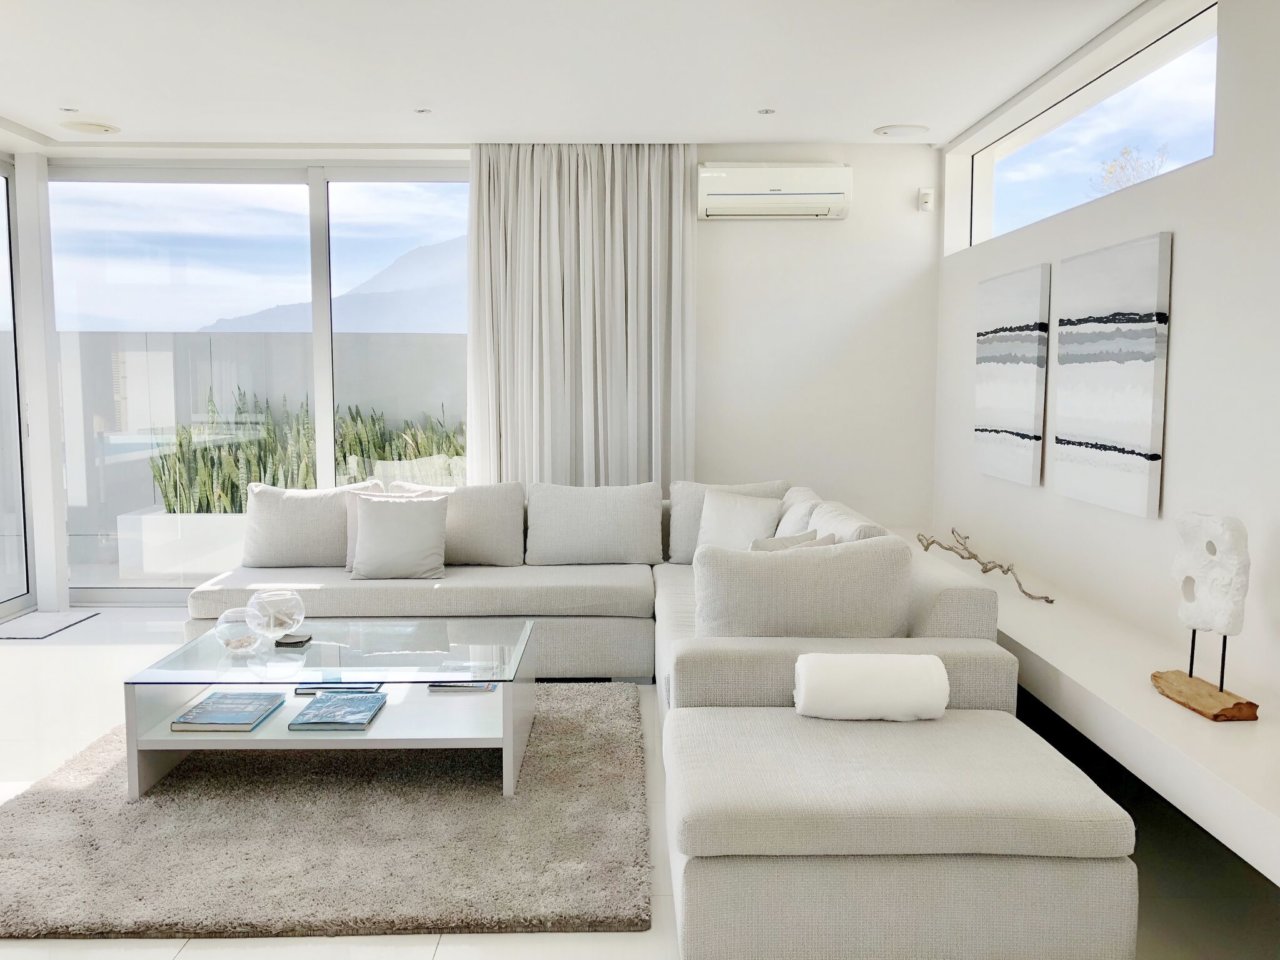 Photo 20 of Aqua Villa accommodation in Camps Bay, Cape Town with 5 bedrooms and 5 bathrooms